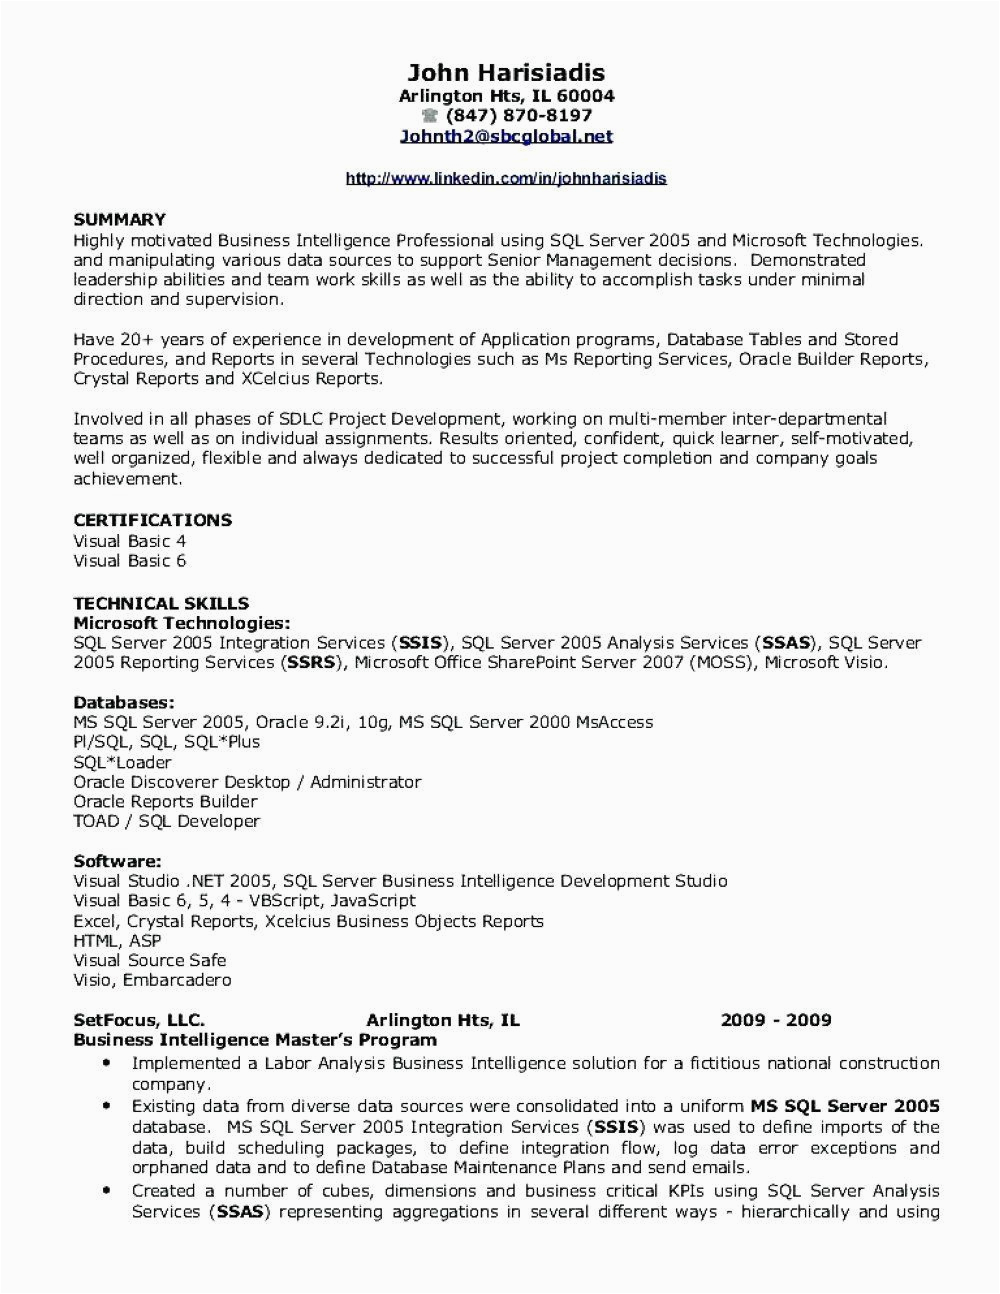 Sample Resume for 2 Years Experience In Unix Resume for 2 Years Experience Unique System